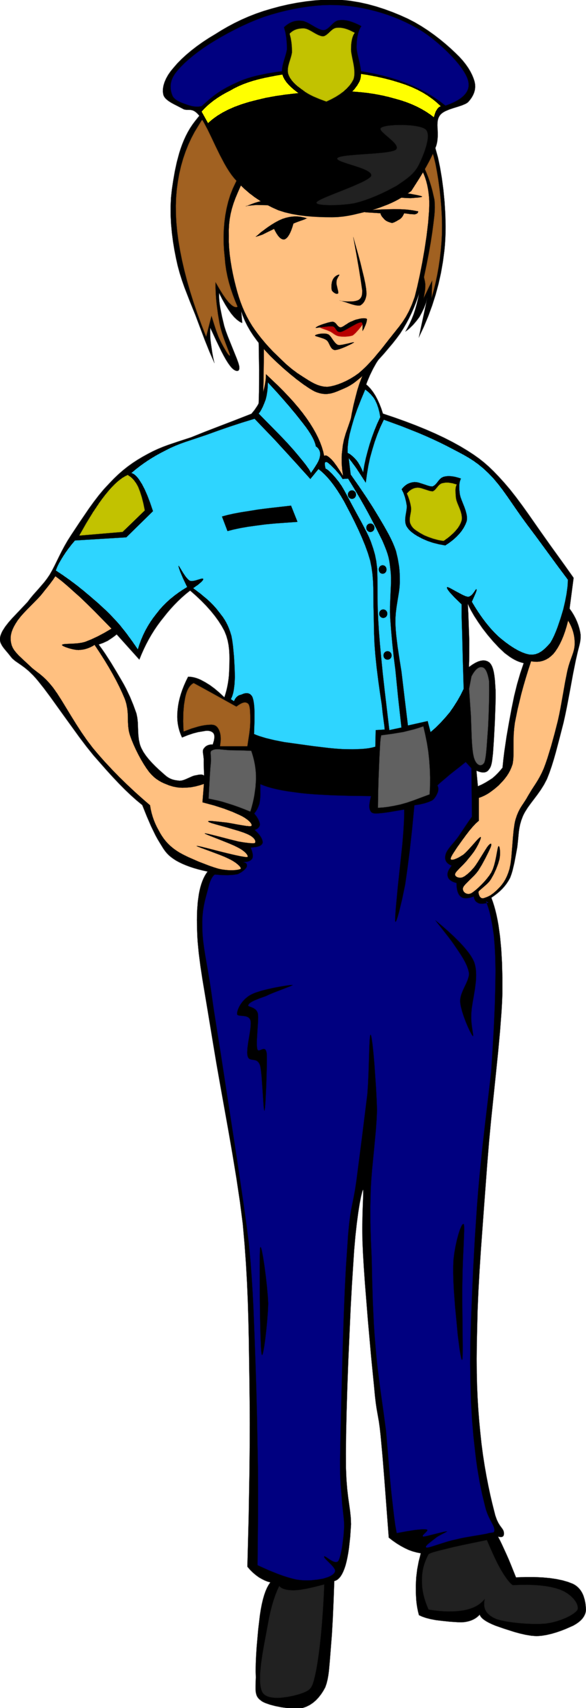 Police Clipart - ClipArt Best